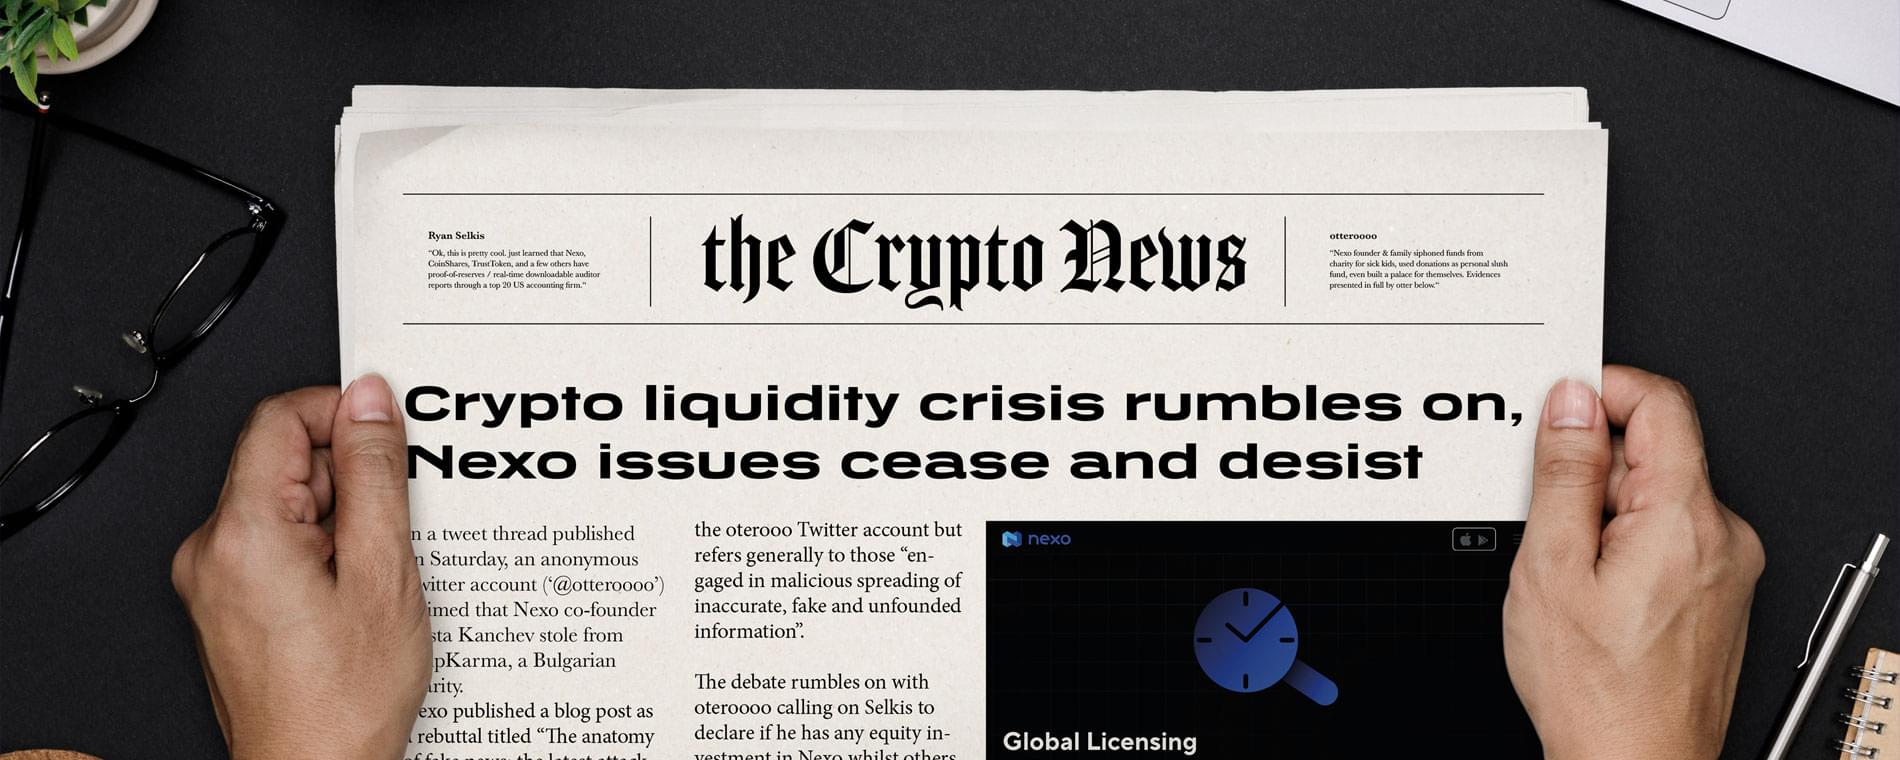 Crypto liquidity crisis rumbles on, Nexo issues cease and desist